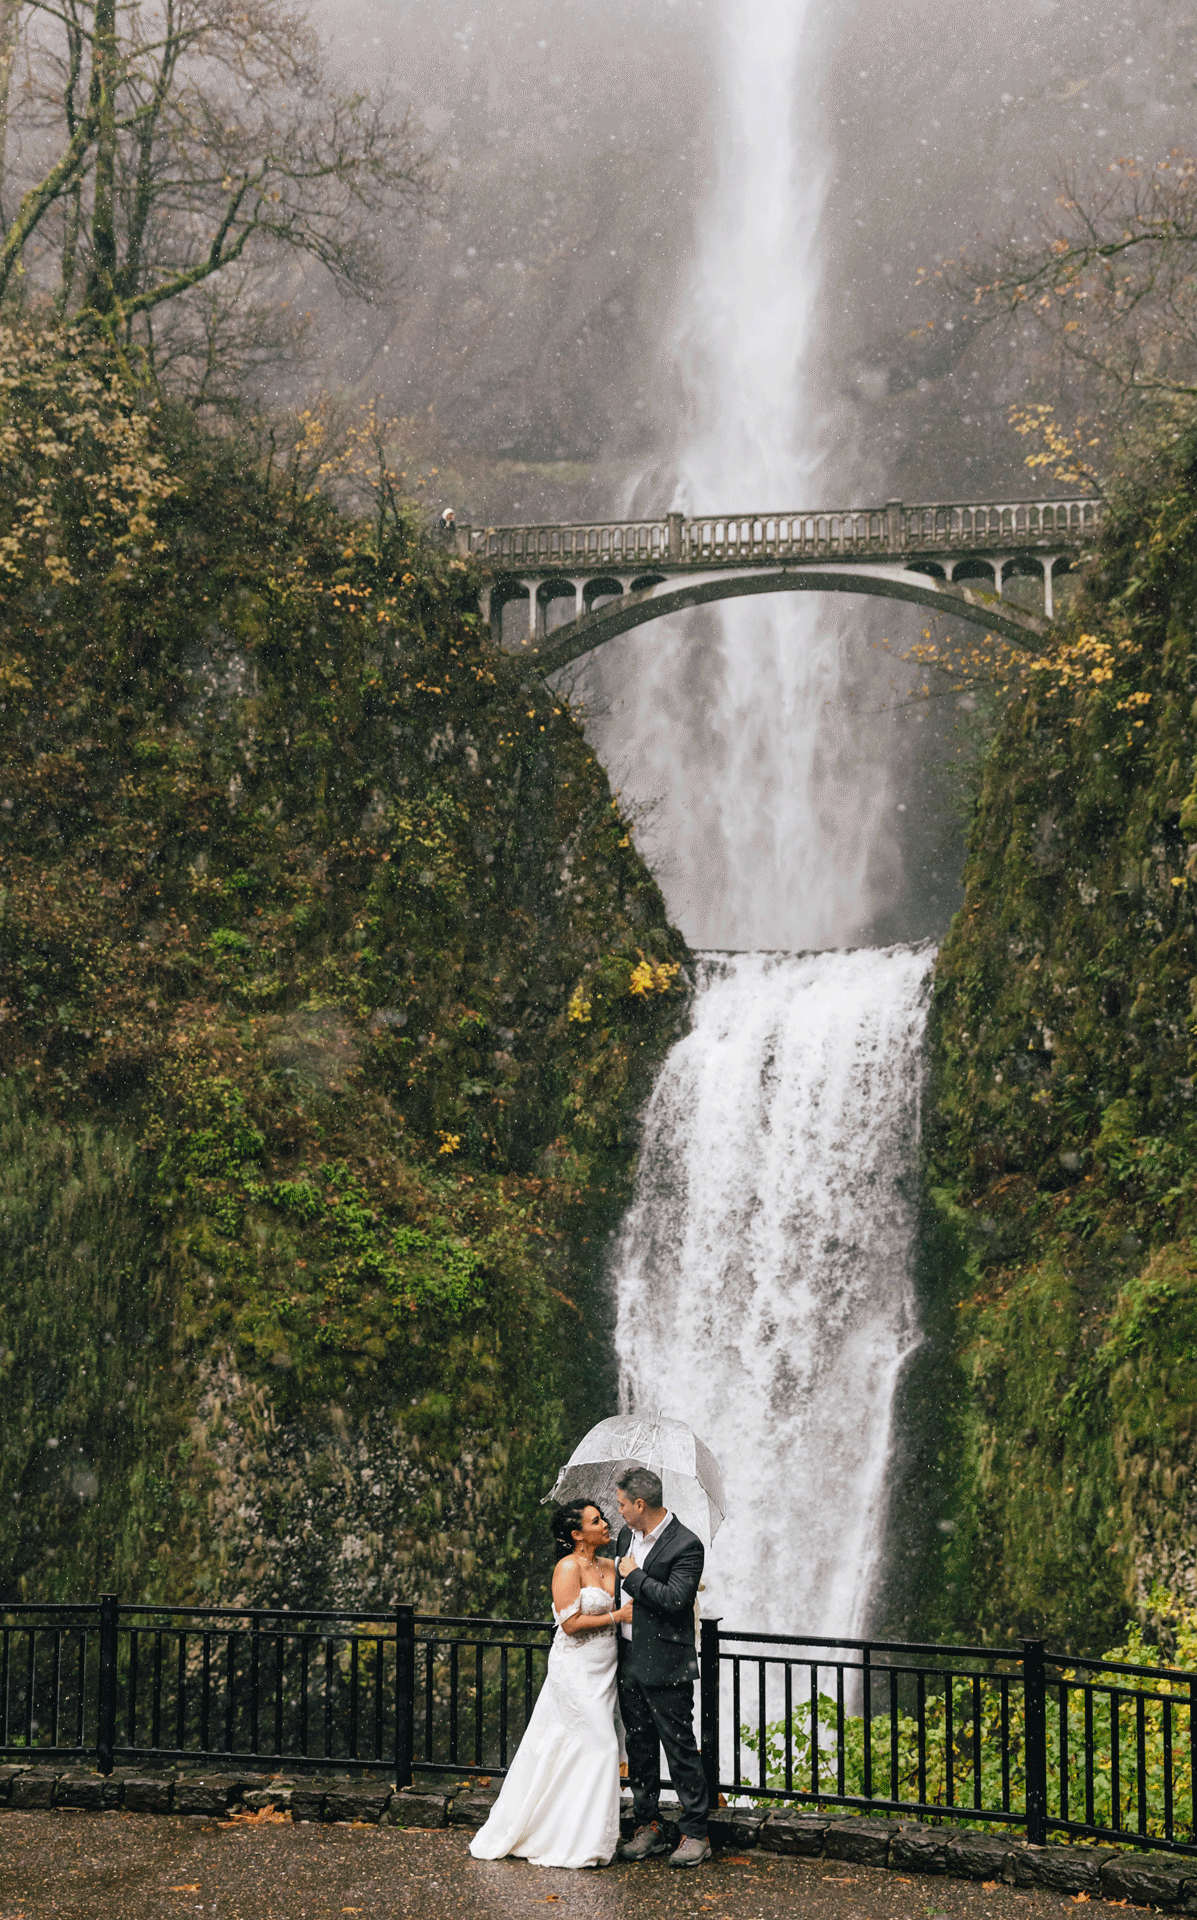 A Puerto Rican bride wearing a white gown with the sleeves off shoulder stands under a clear umbrella held by her groom in a black suit standing in front of Oregon's Multnomah Falls as the snow begins to fall for their winter adventure elopement. | Erica Swantek Photography